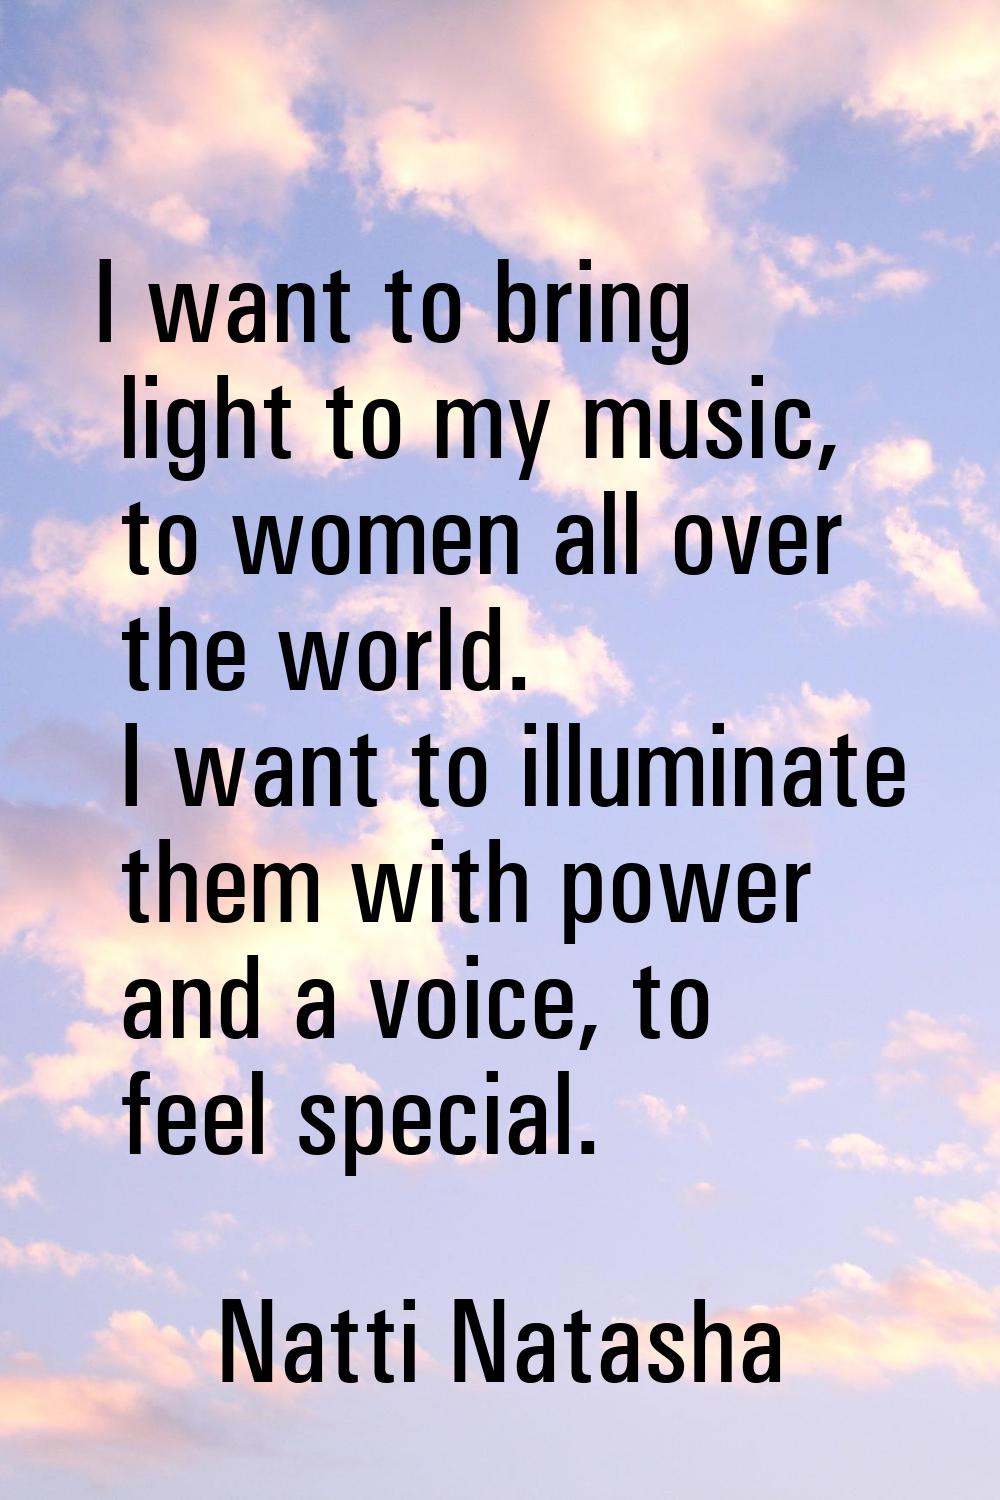 I want to bring light to my music, to women all over the world. I want to illuminate them with powe